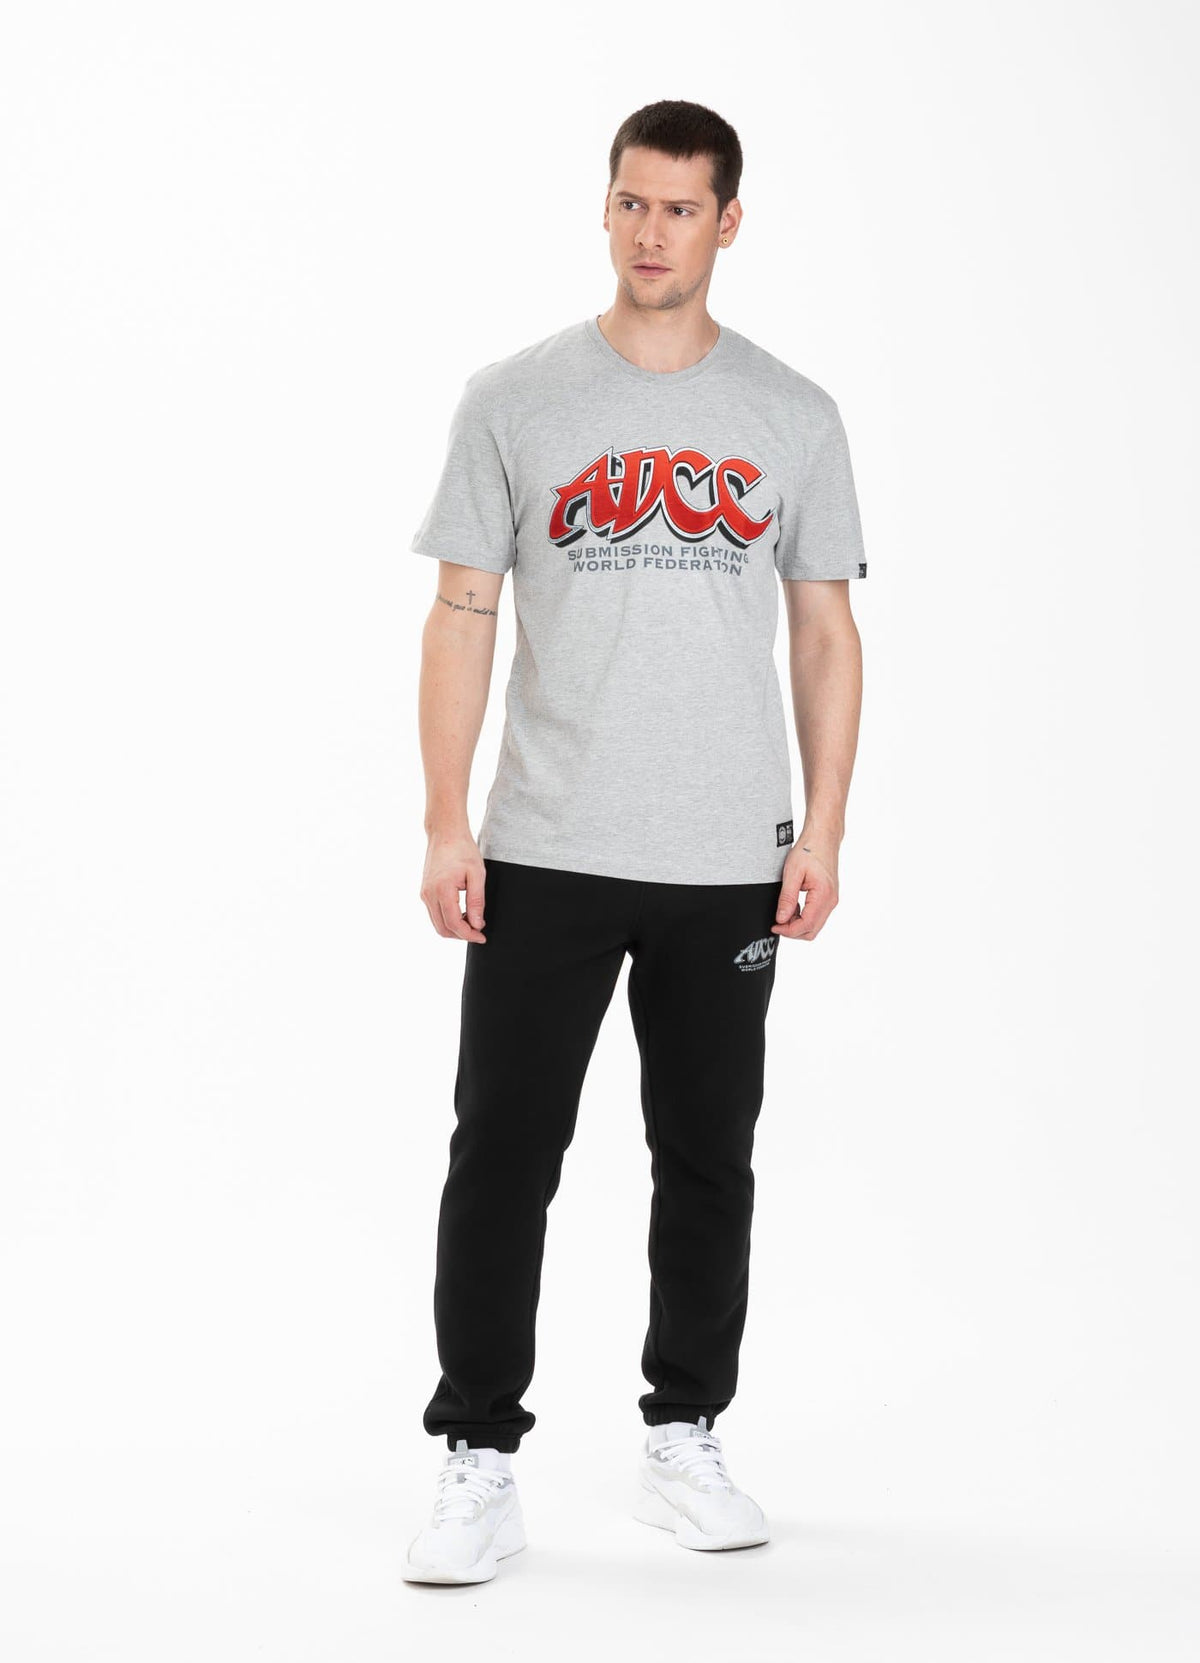 Official ADCC T-Shirt Grey - Pitbull West Coast International Store 